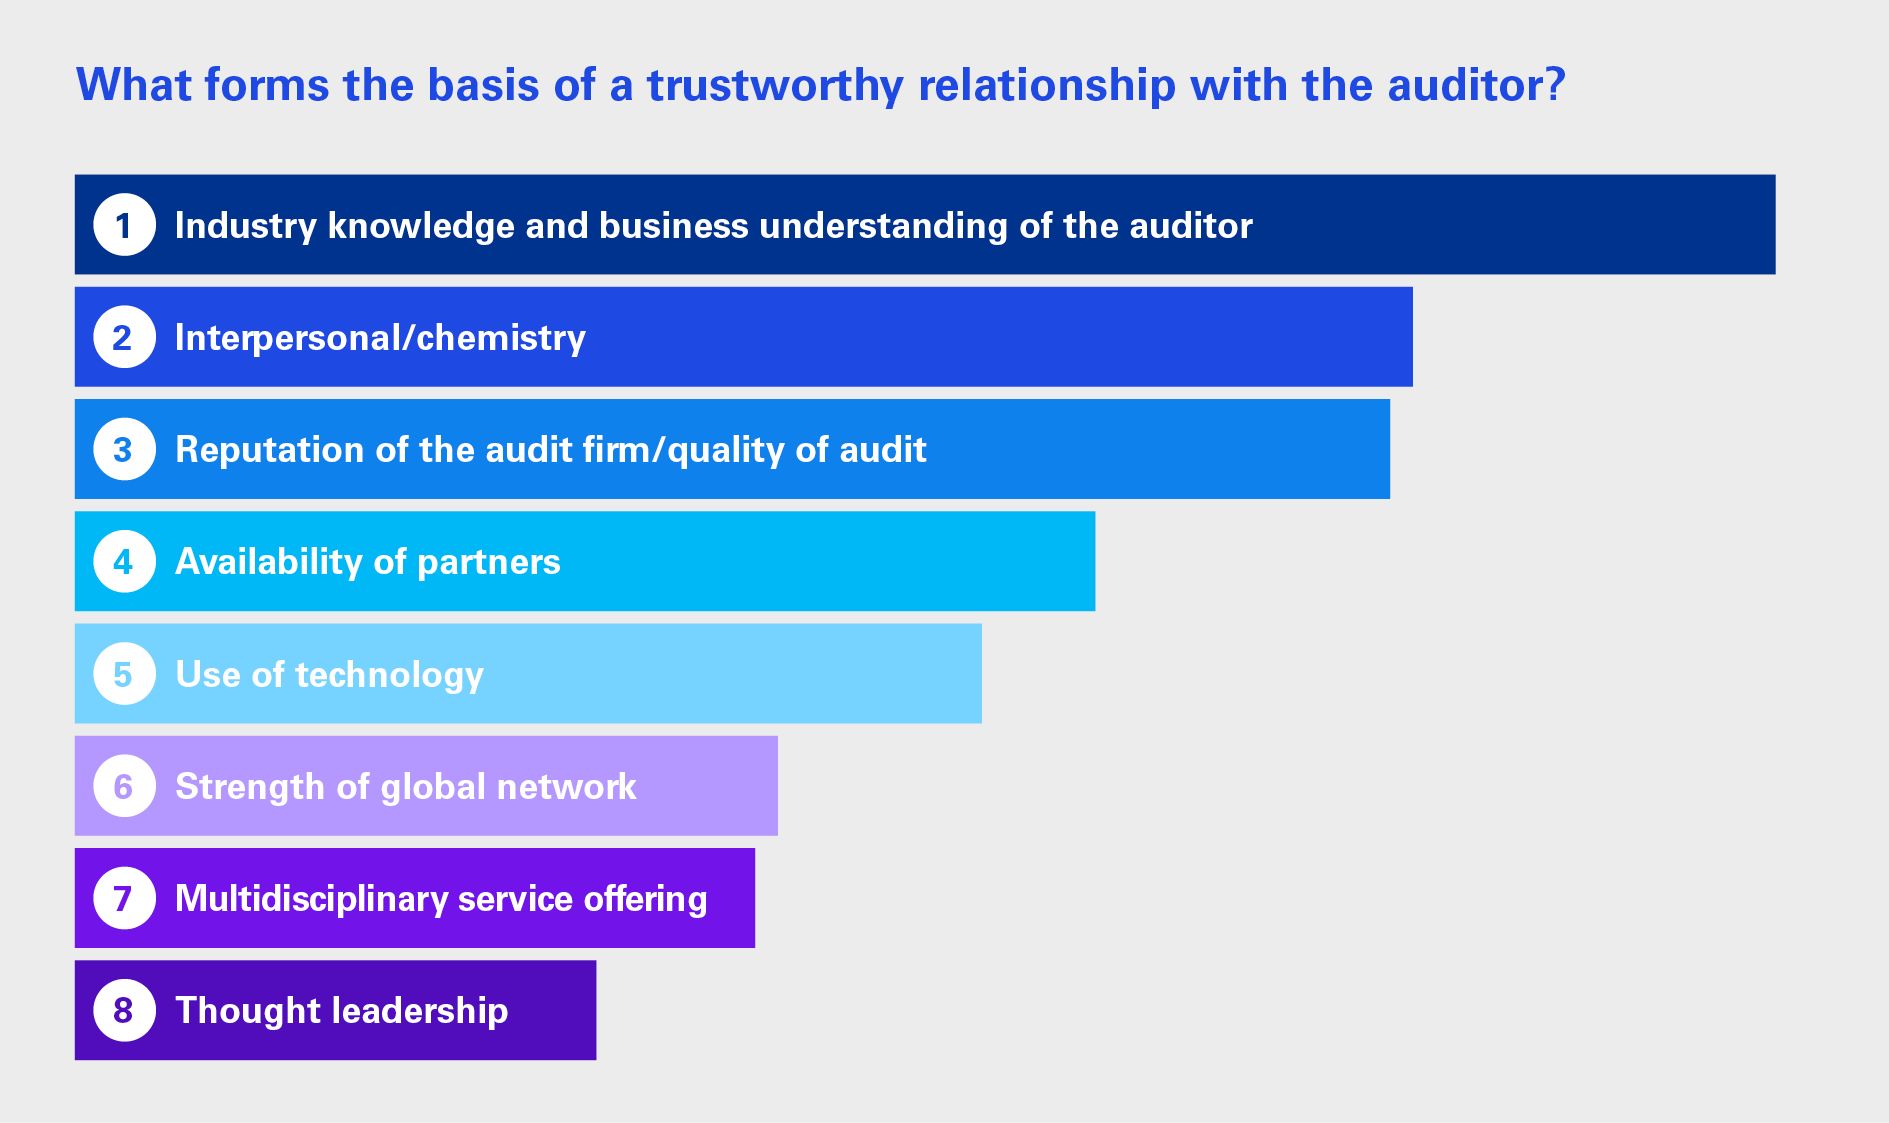 What forms the basis of a trustworthy relationship with the auditor?